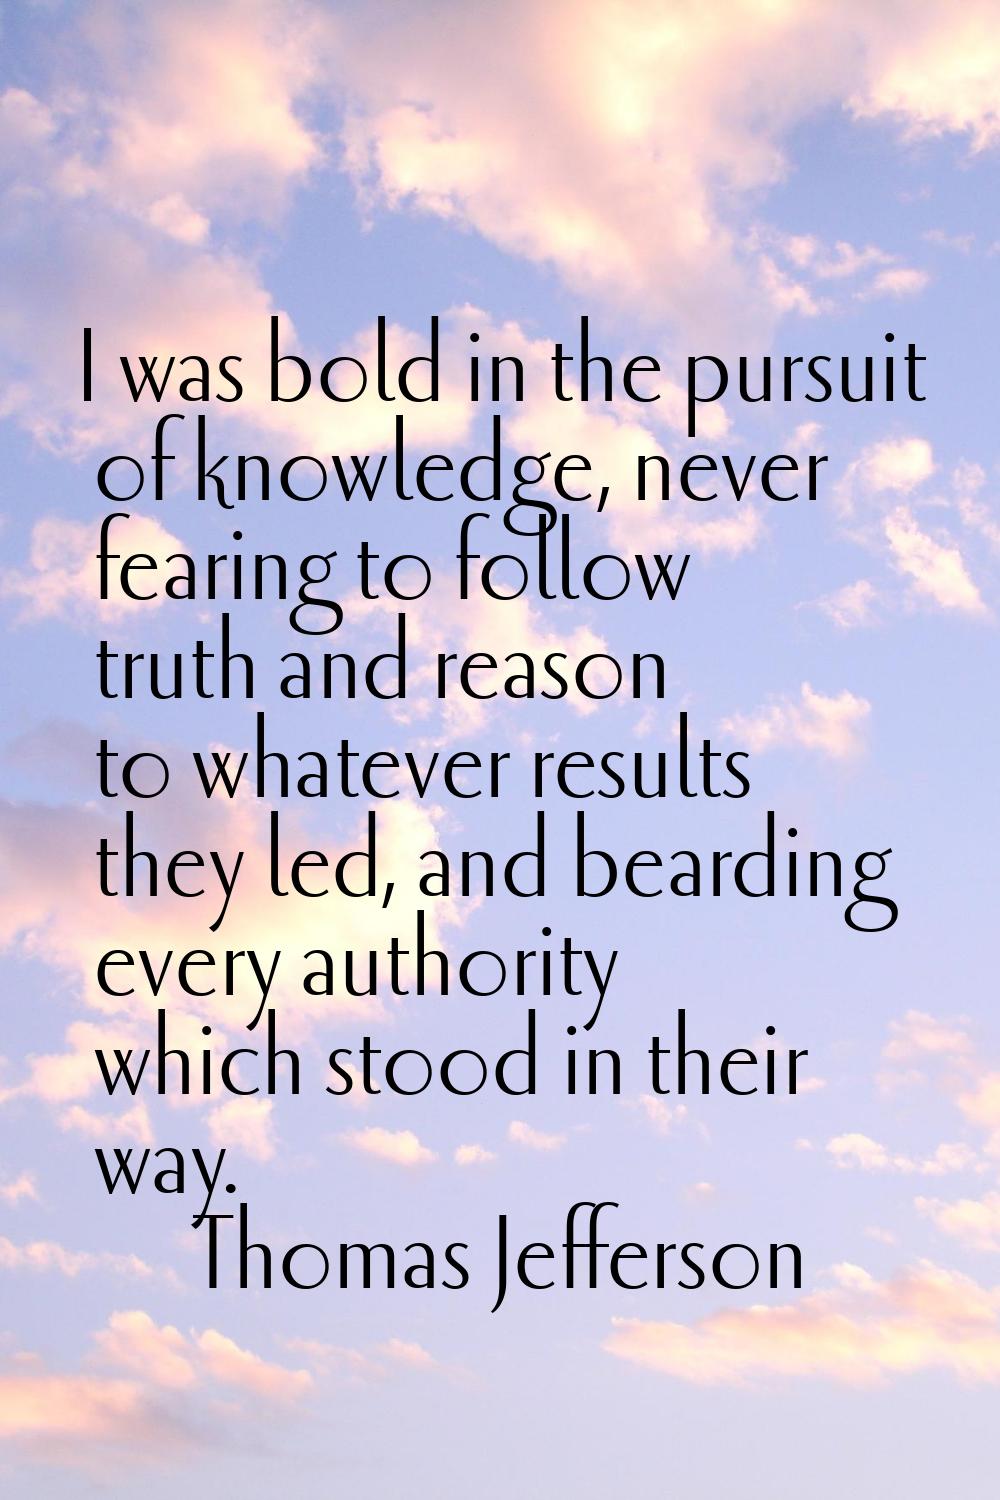 I was bold in the pursuit of knowledge, never fearing to follow truth and reason to whatever result